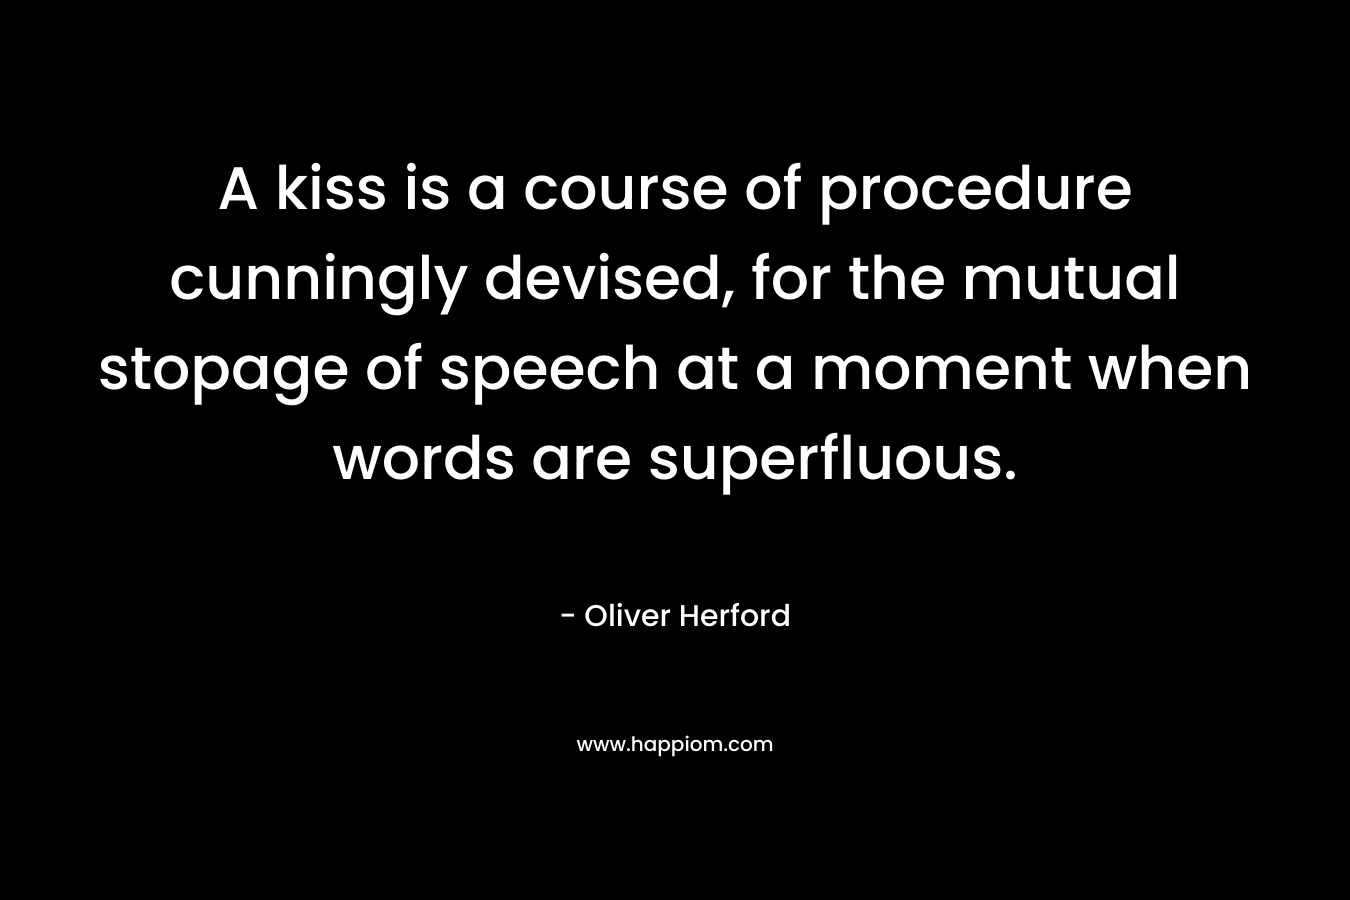 A kiss is a course of procedure cunningly devised, for the mutual stopage of speech at a moment when words are superfluous. – Oliver Herford